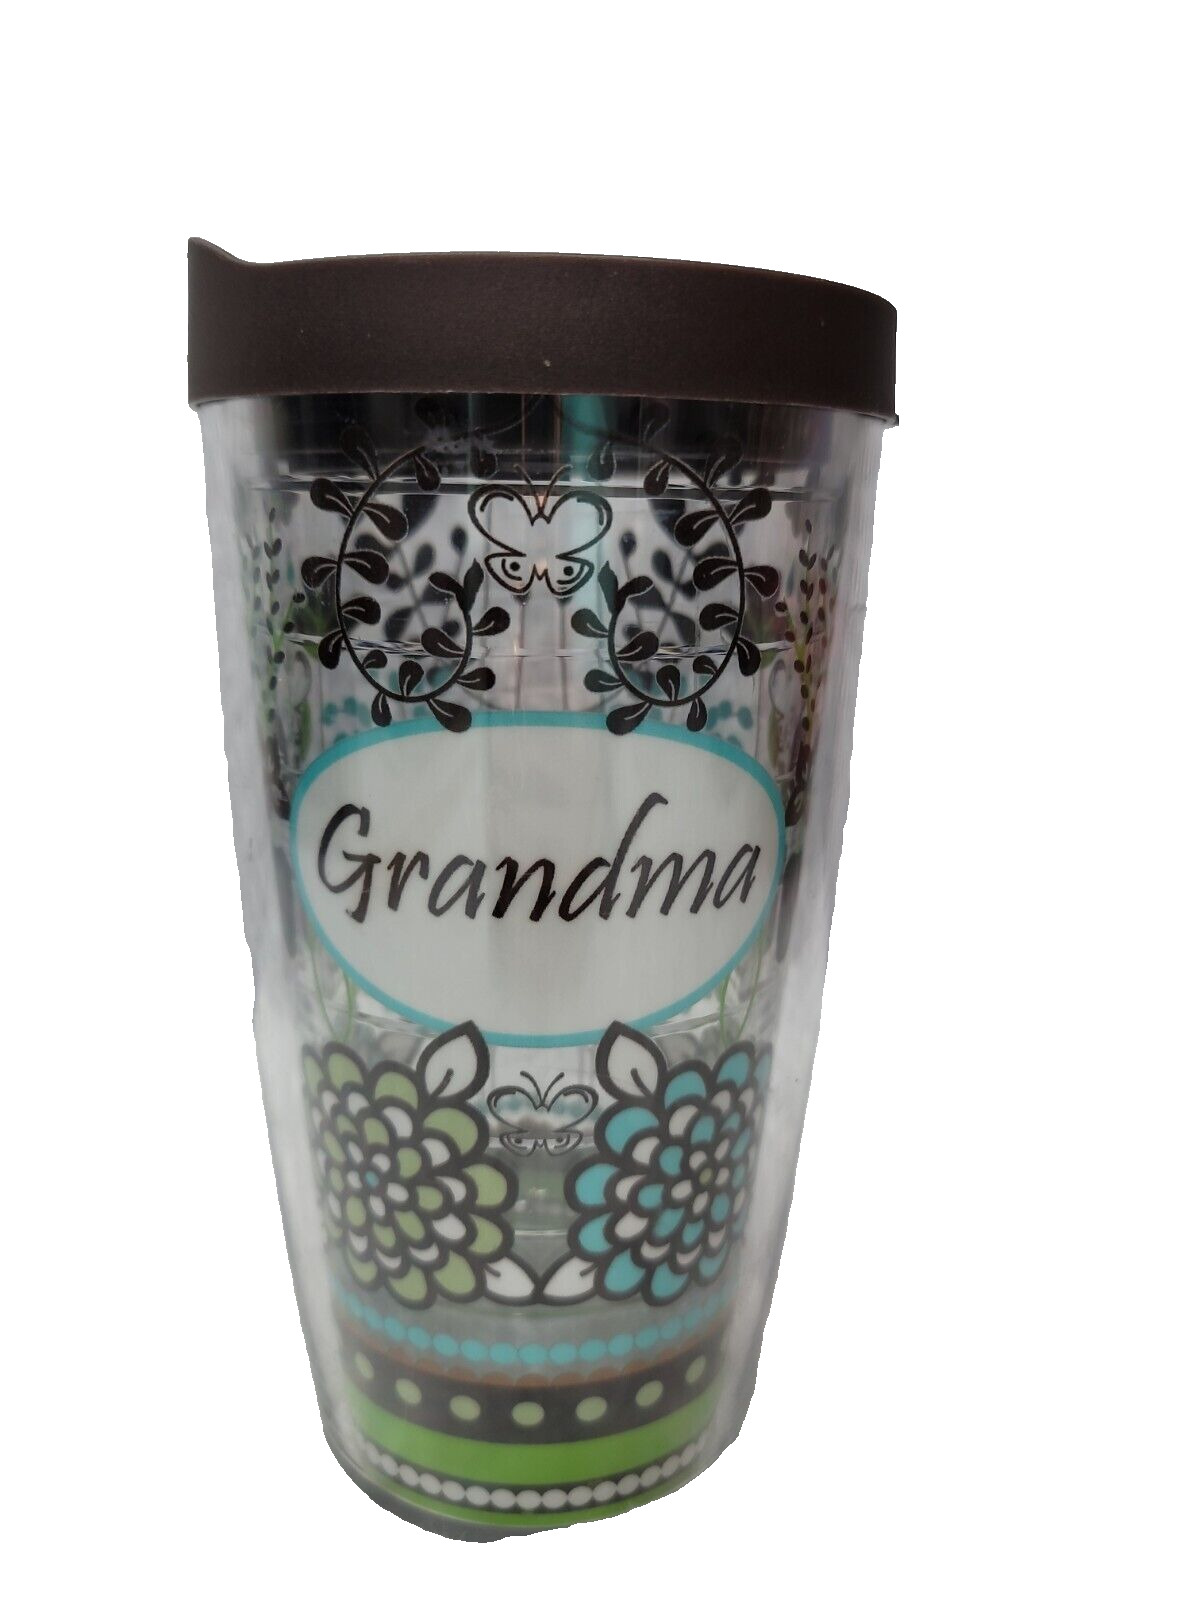 Grandma Floral/Butterfly Tervis Tumbler 16 oz With Lid Insulated Hot/Cold Drinks